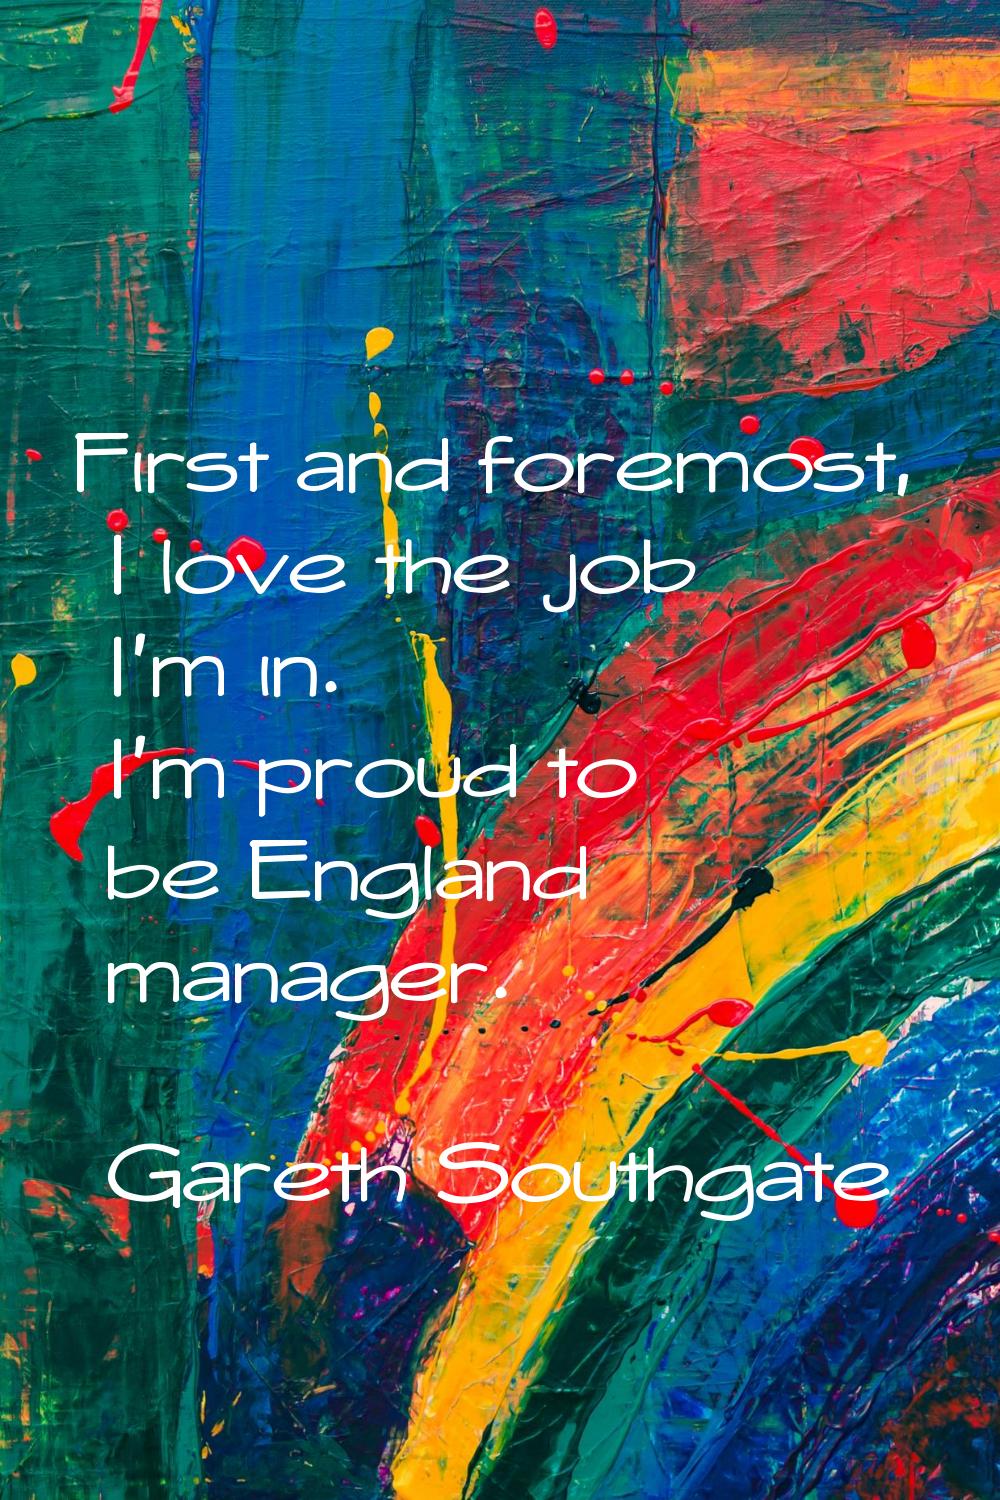 First and foremost, I love the job I'm in. I'm proud to be England manager.